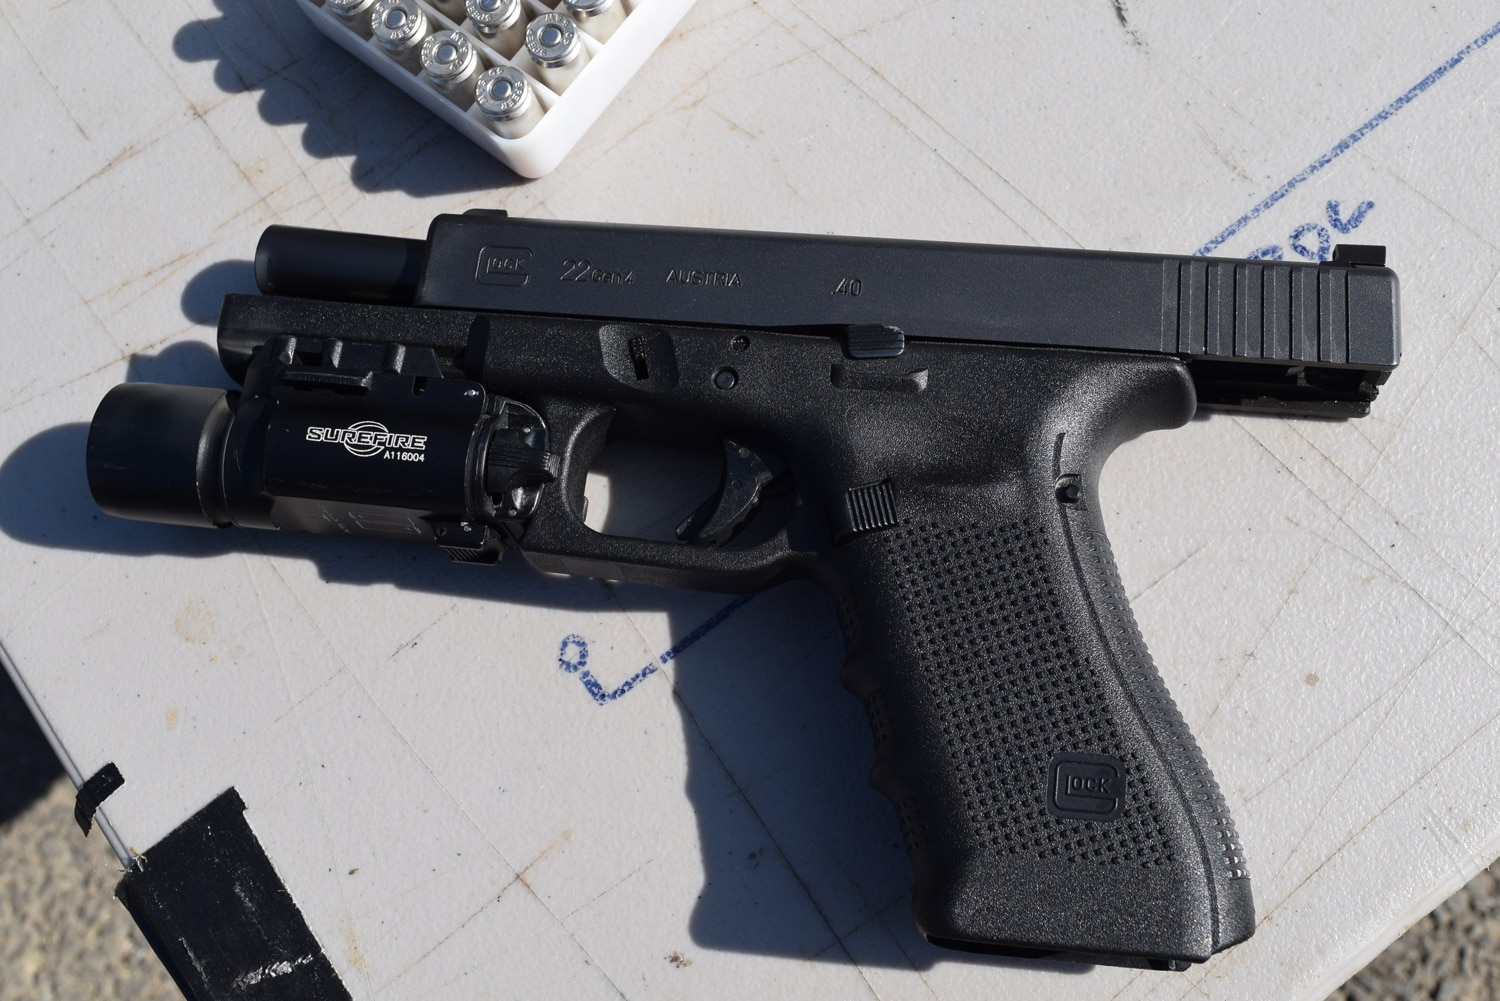 The Glock 22 handgun issued to ATF SRT agents. The .40-caliber pistol is equipped with a SureFire light. (Photo: Daniel Terrill/Guns.com)